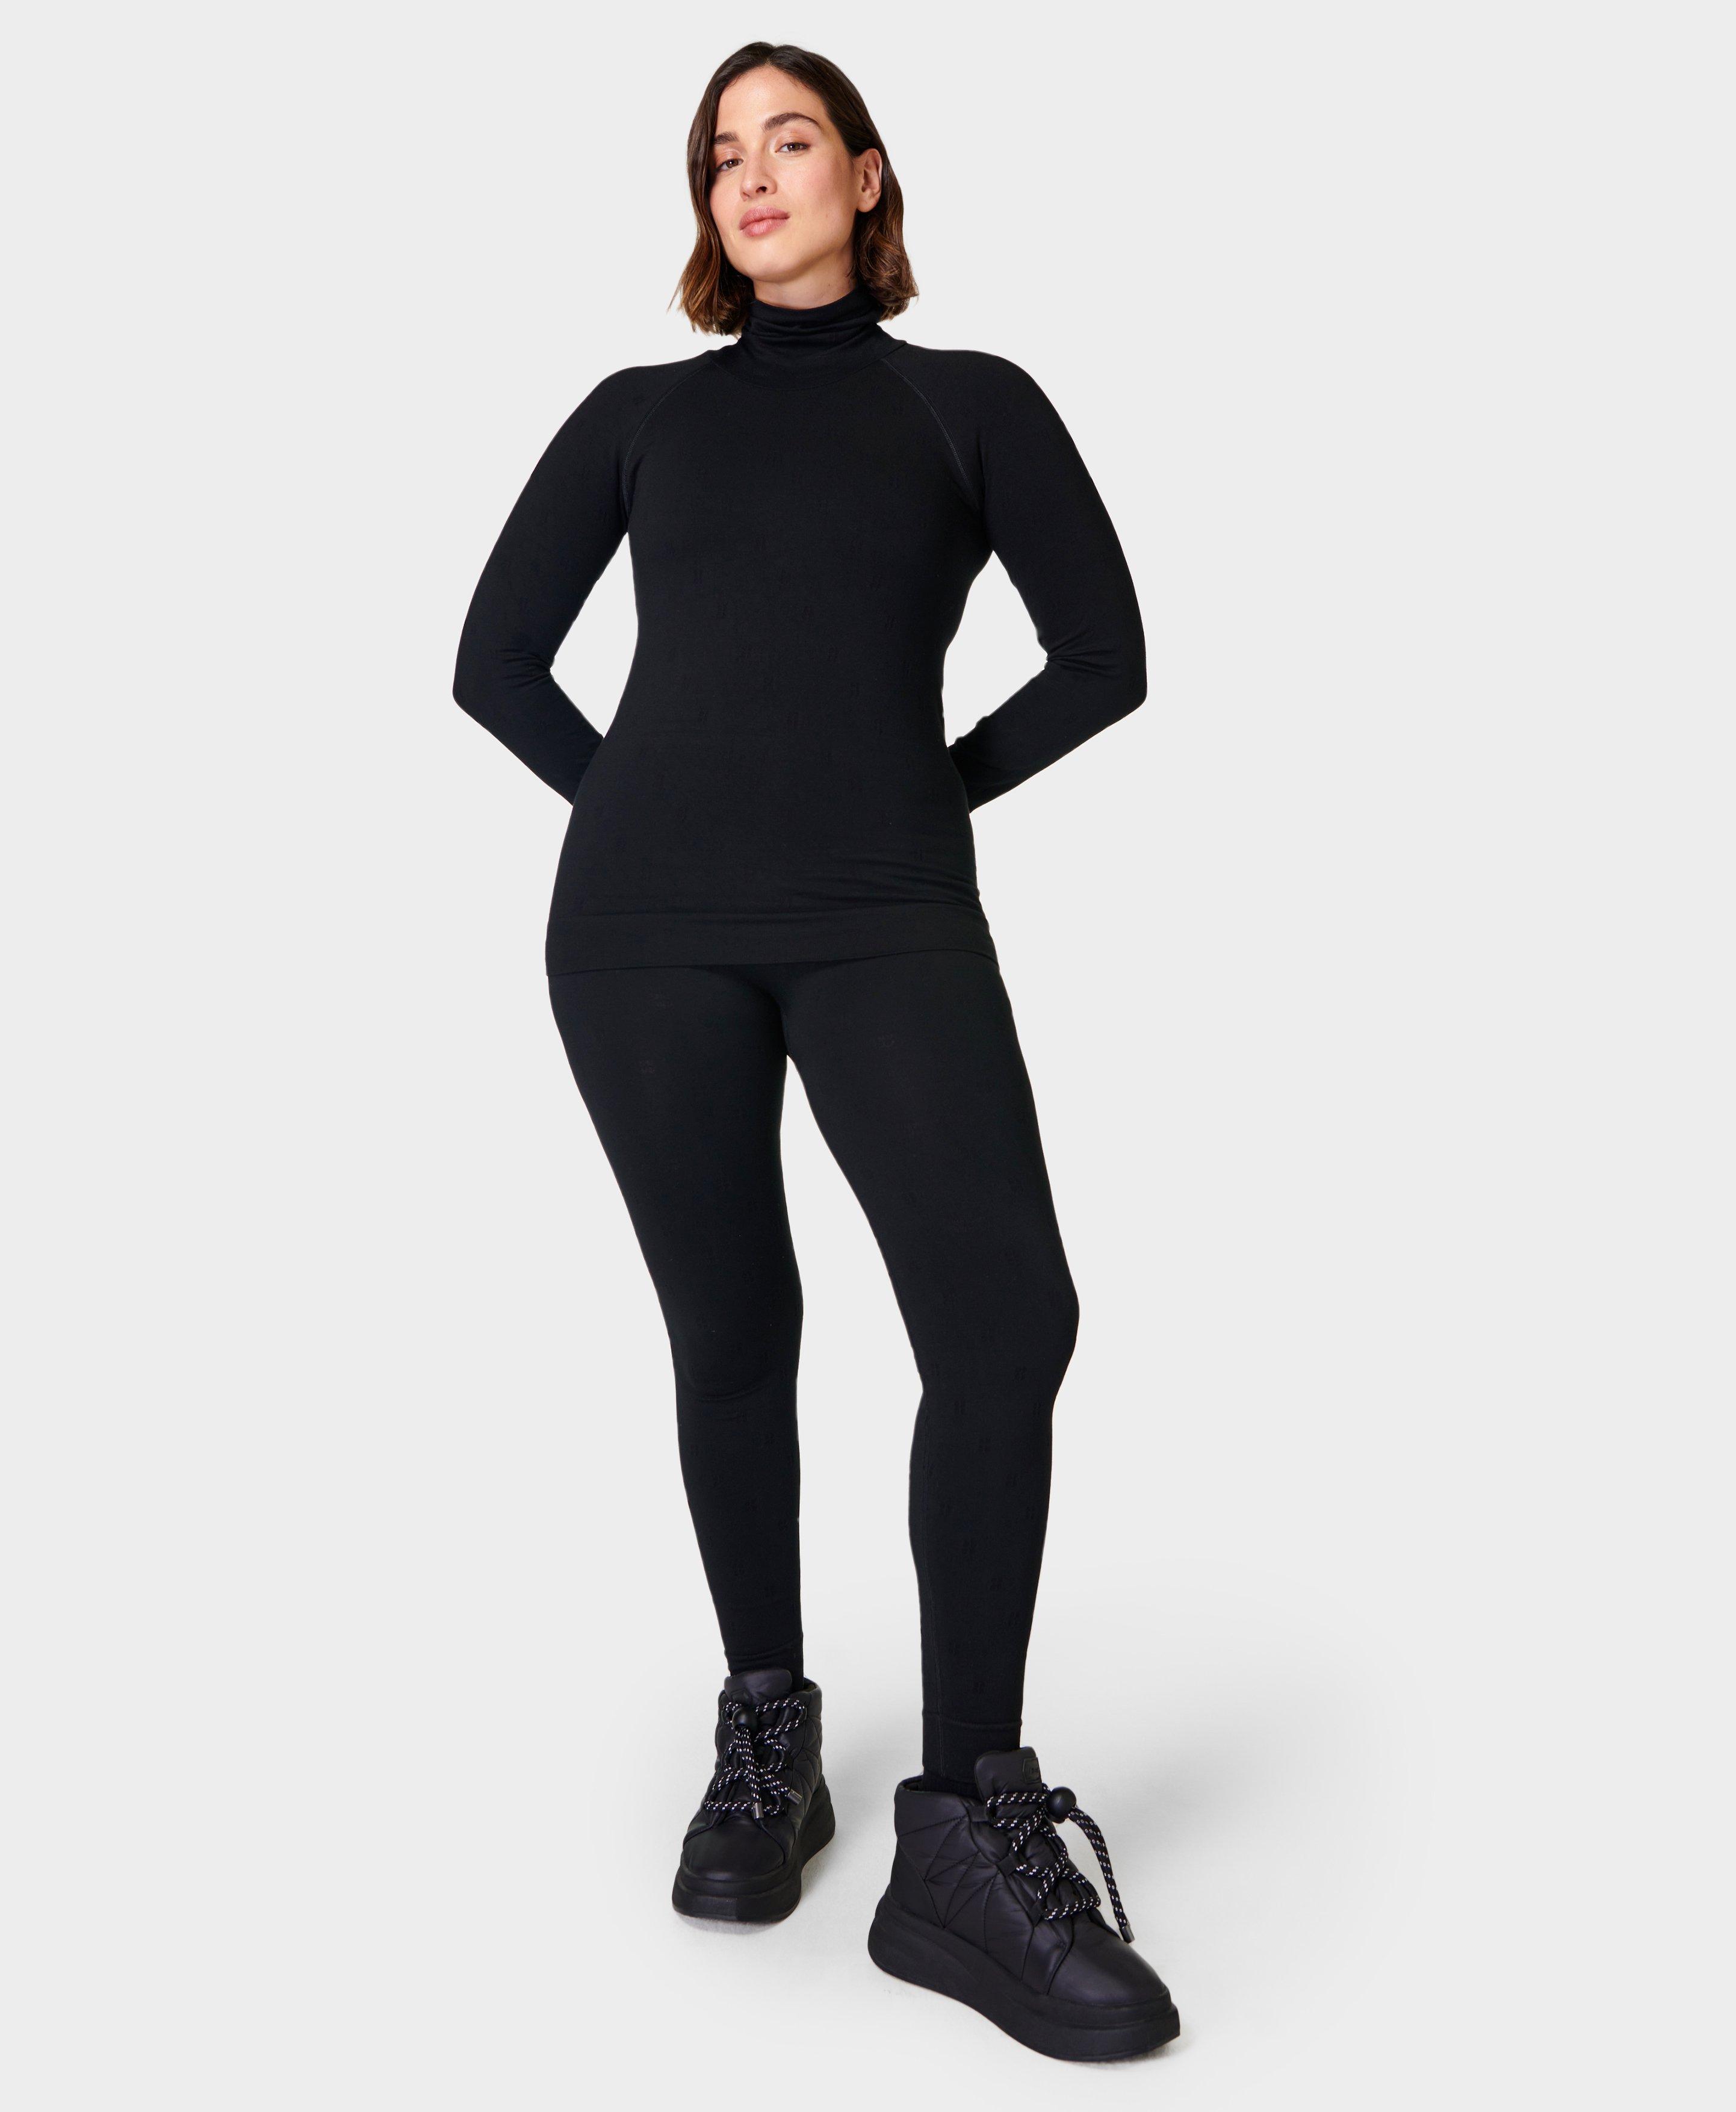 Sweaty Betty fashion − Browse 700+ best sellers from 9 stores